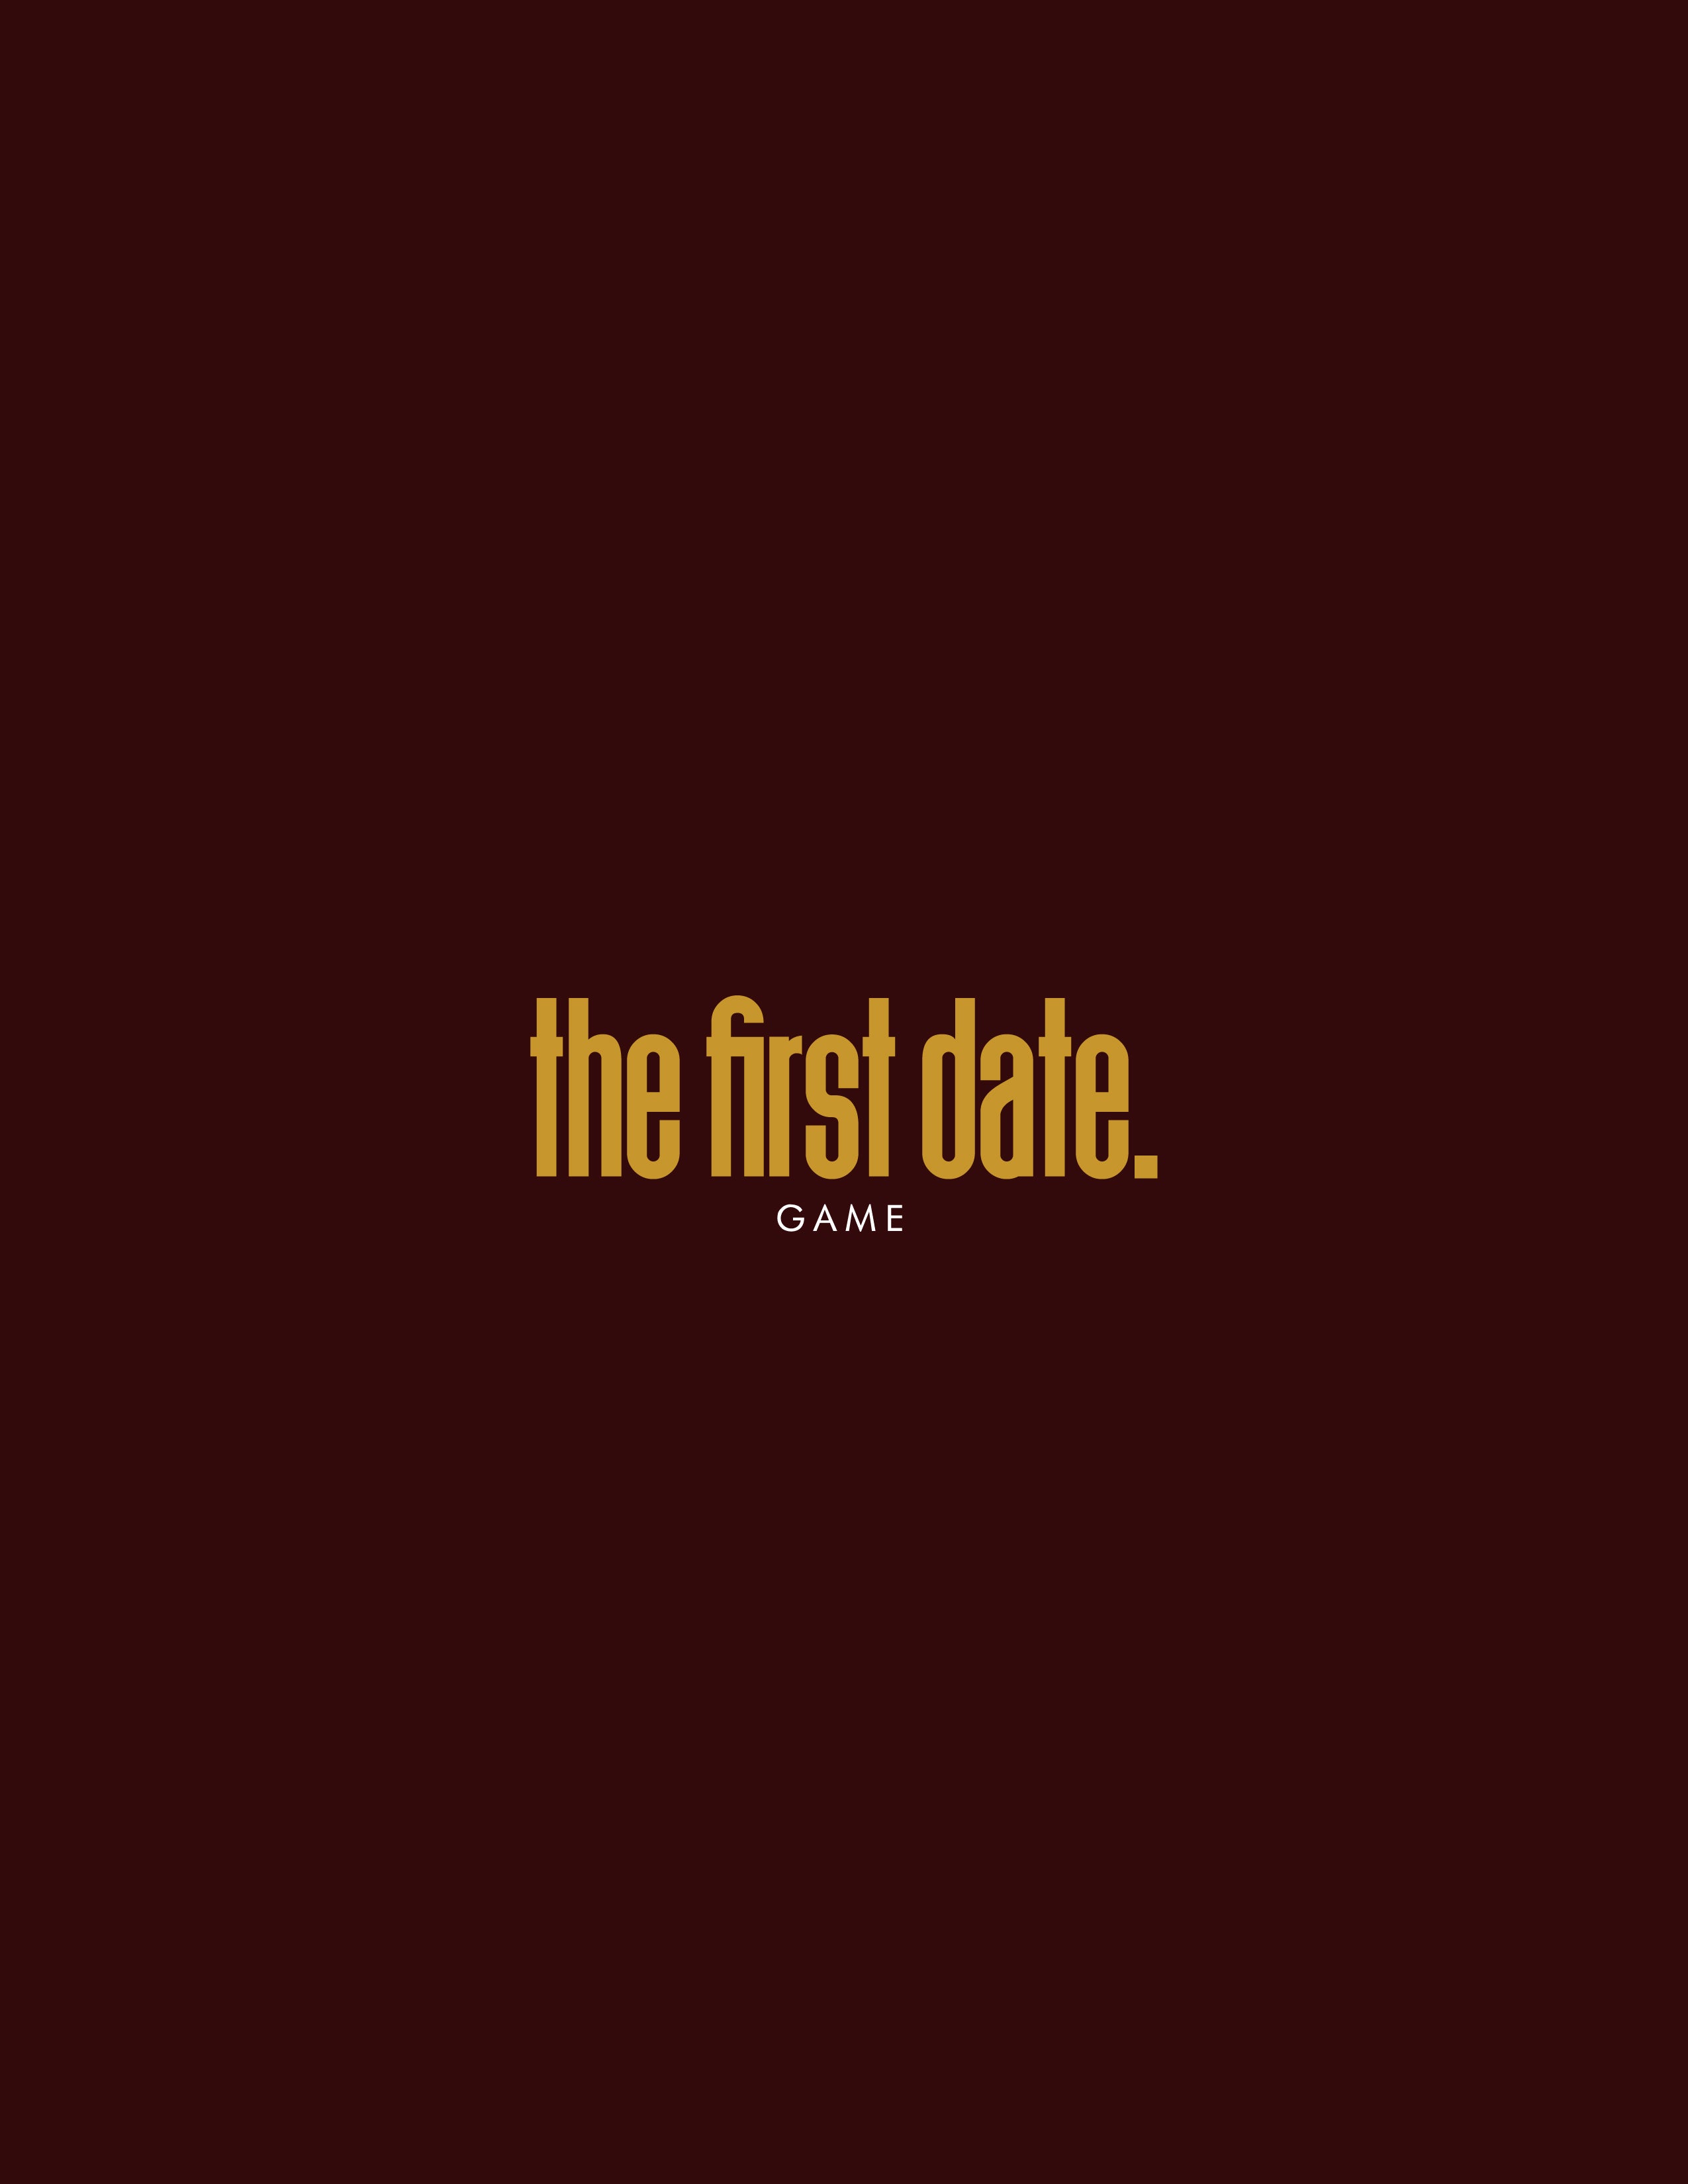 THE FIRST DATE GAME